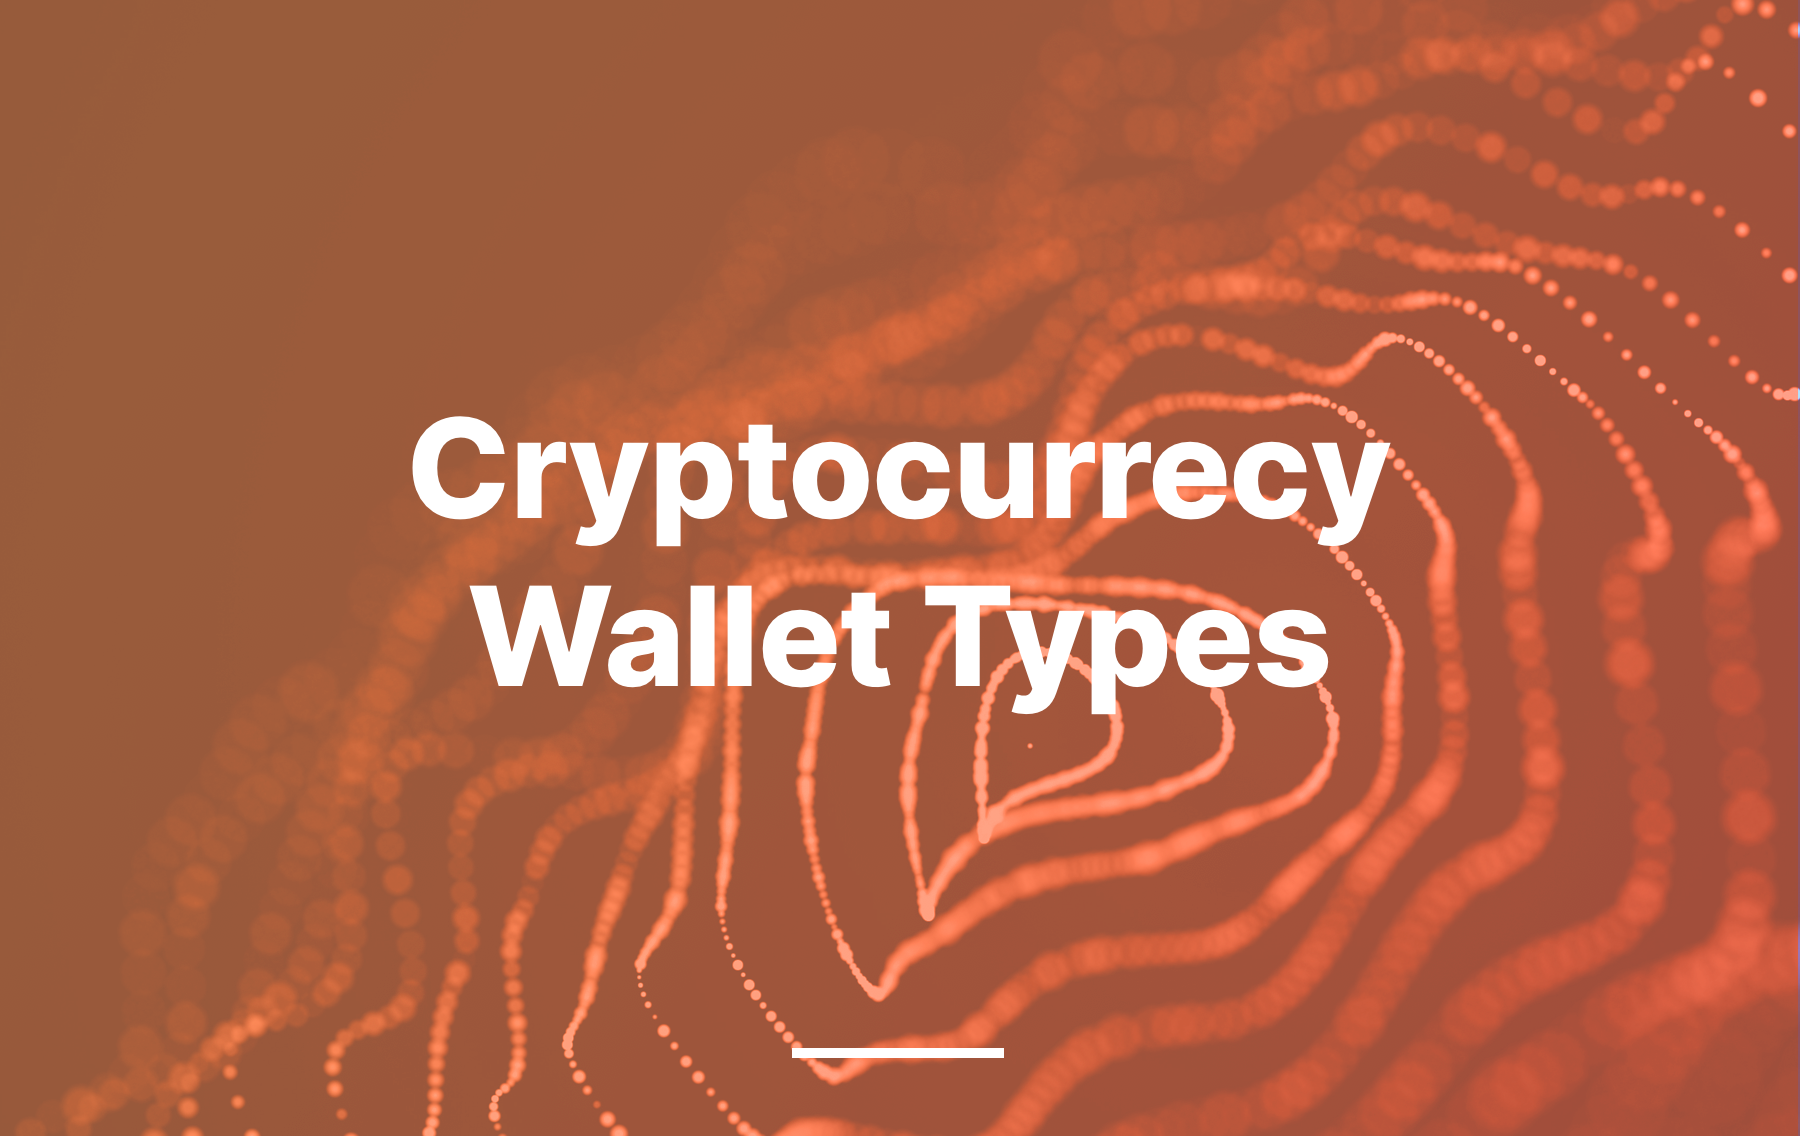 Cryptocurrecy wallet types